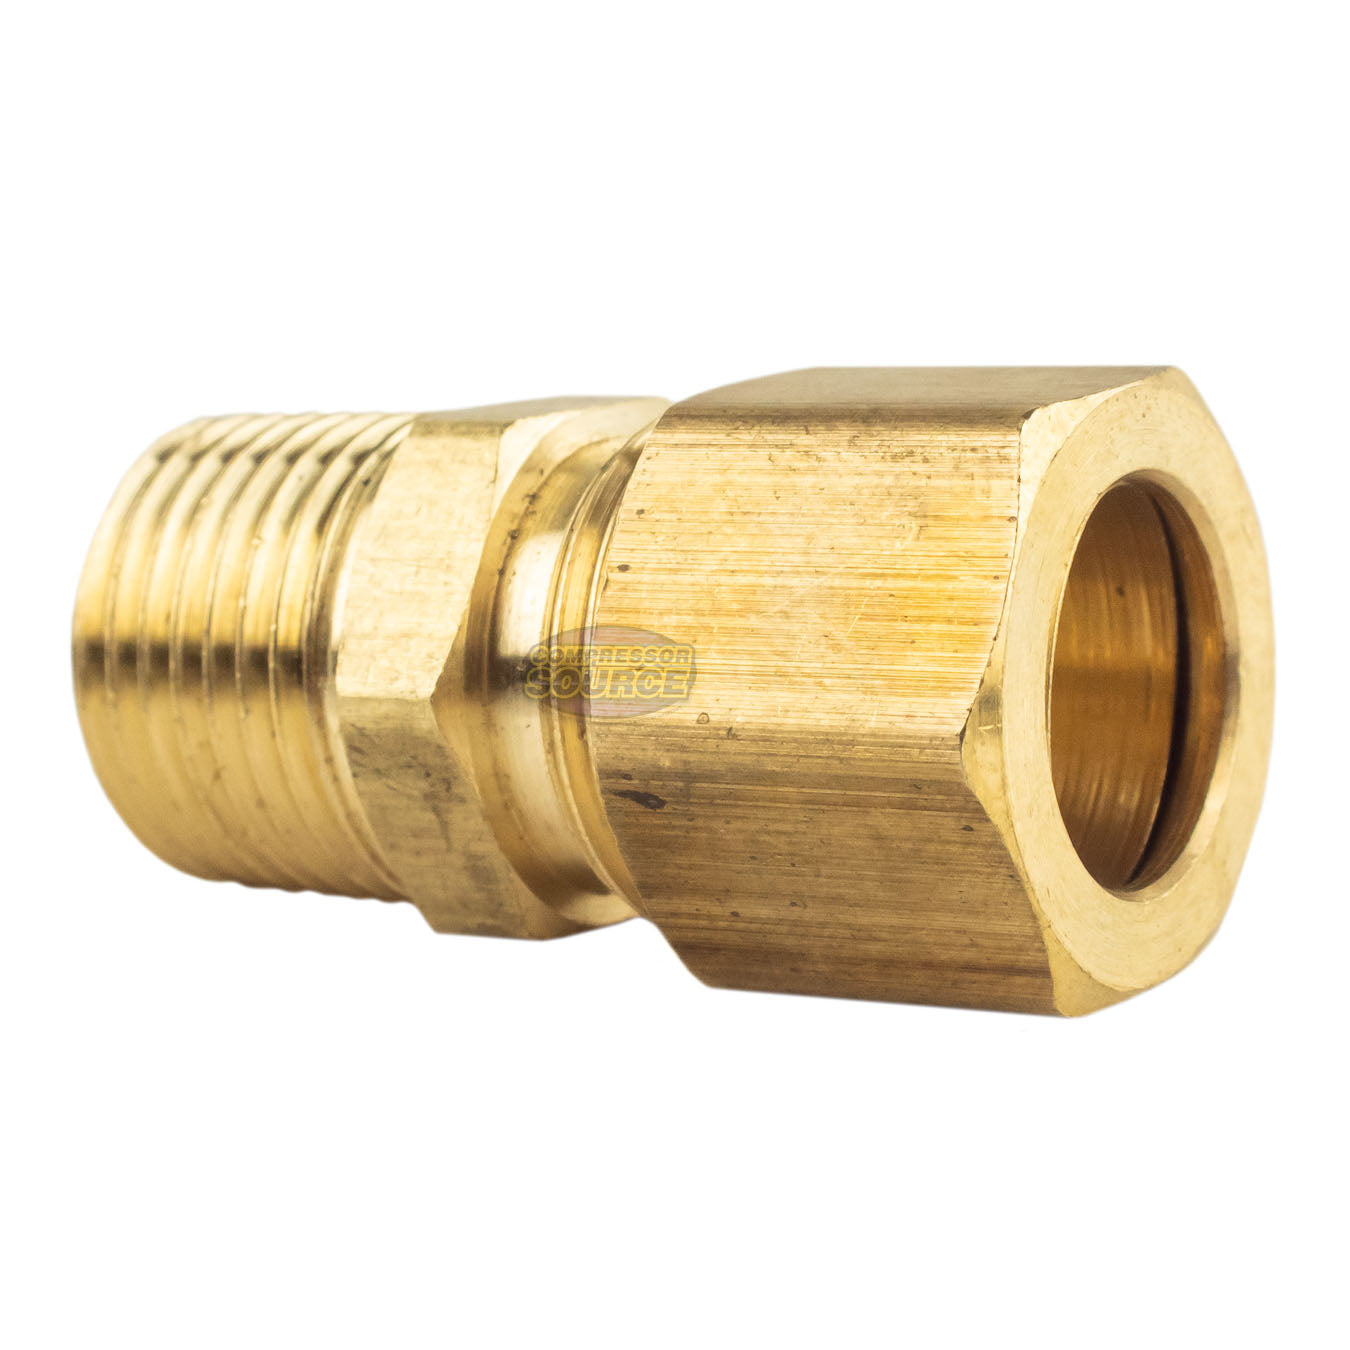 3/8" OD x 3/8" Male NPT Connector Brass Compression Fitting for 3/8" OD Tube